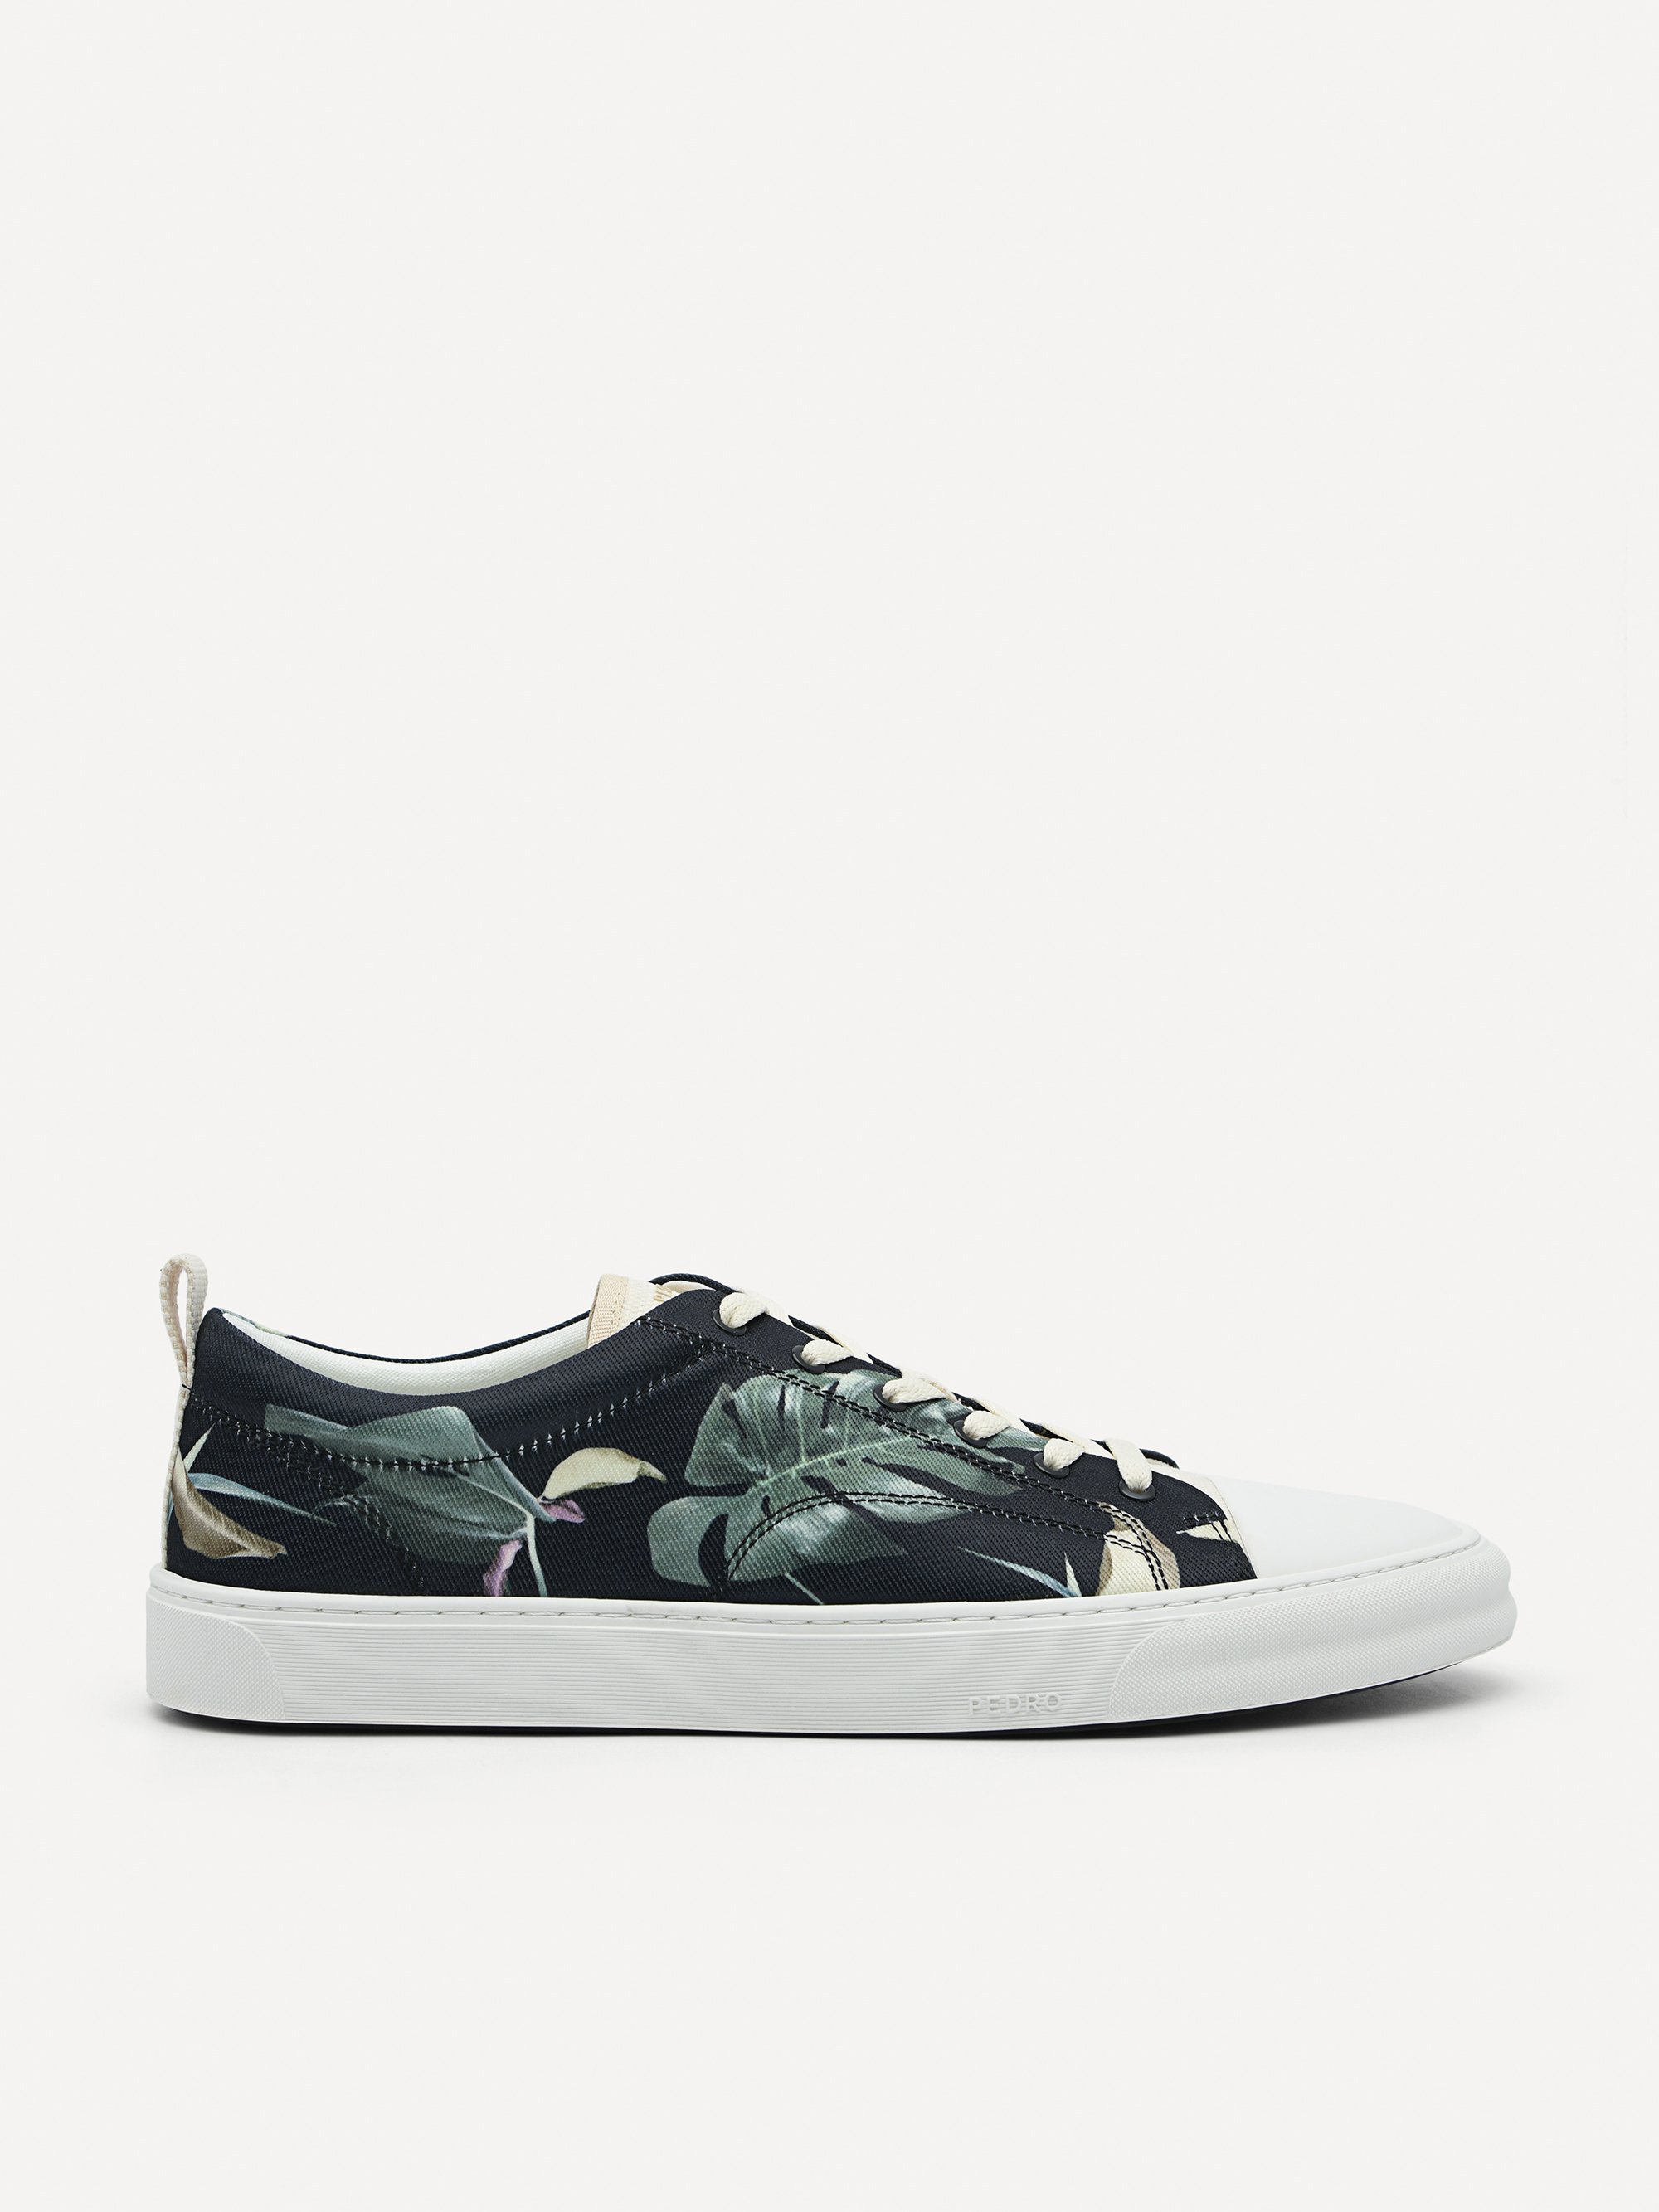 Multi Lace-Up Sneakers - PEDRO SG